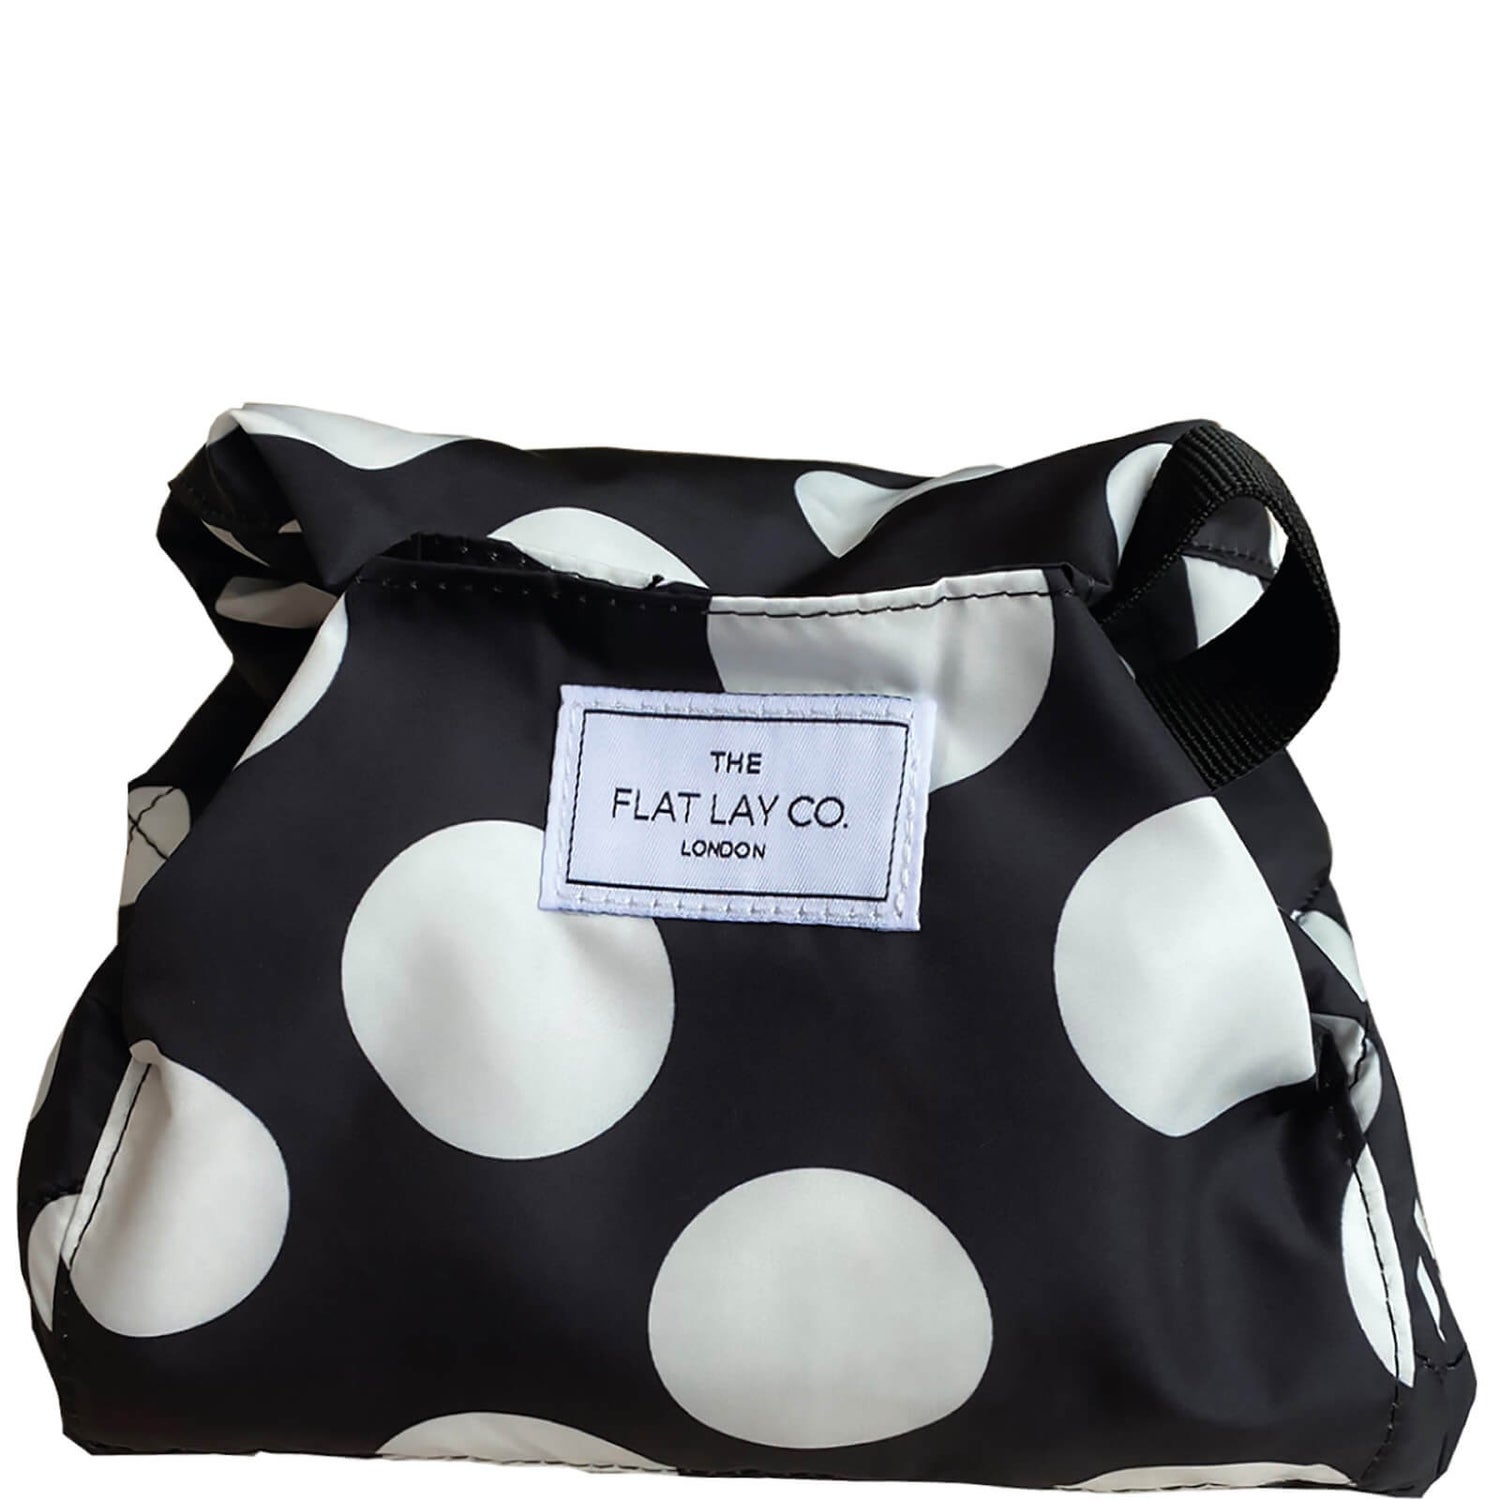 The Flat Lay Co. Drawstring Bag - Double Spots